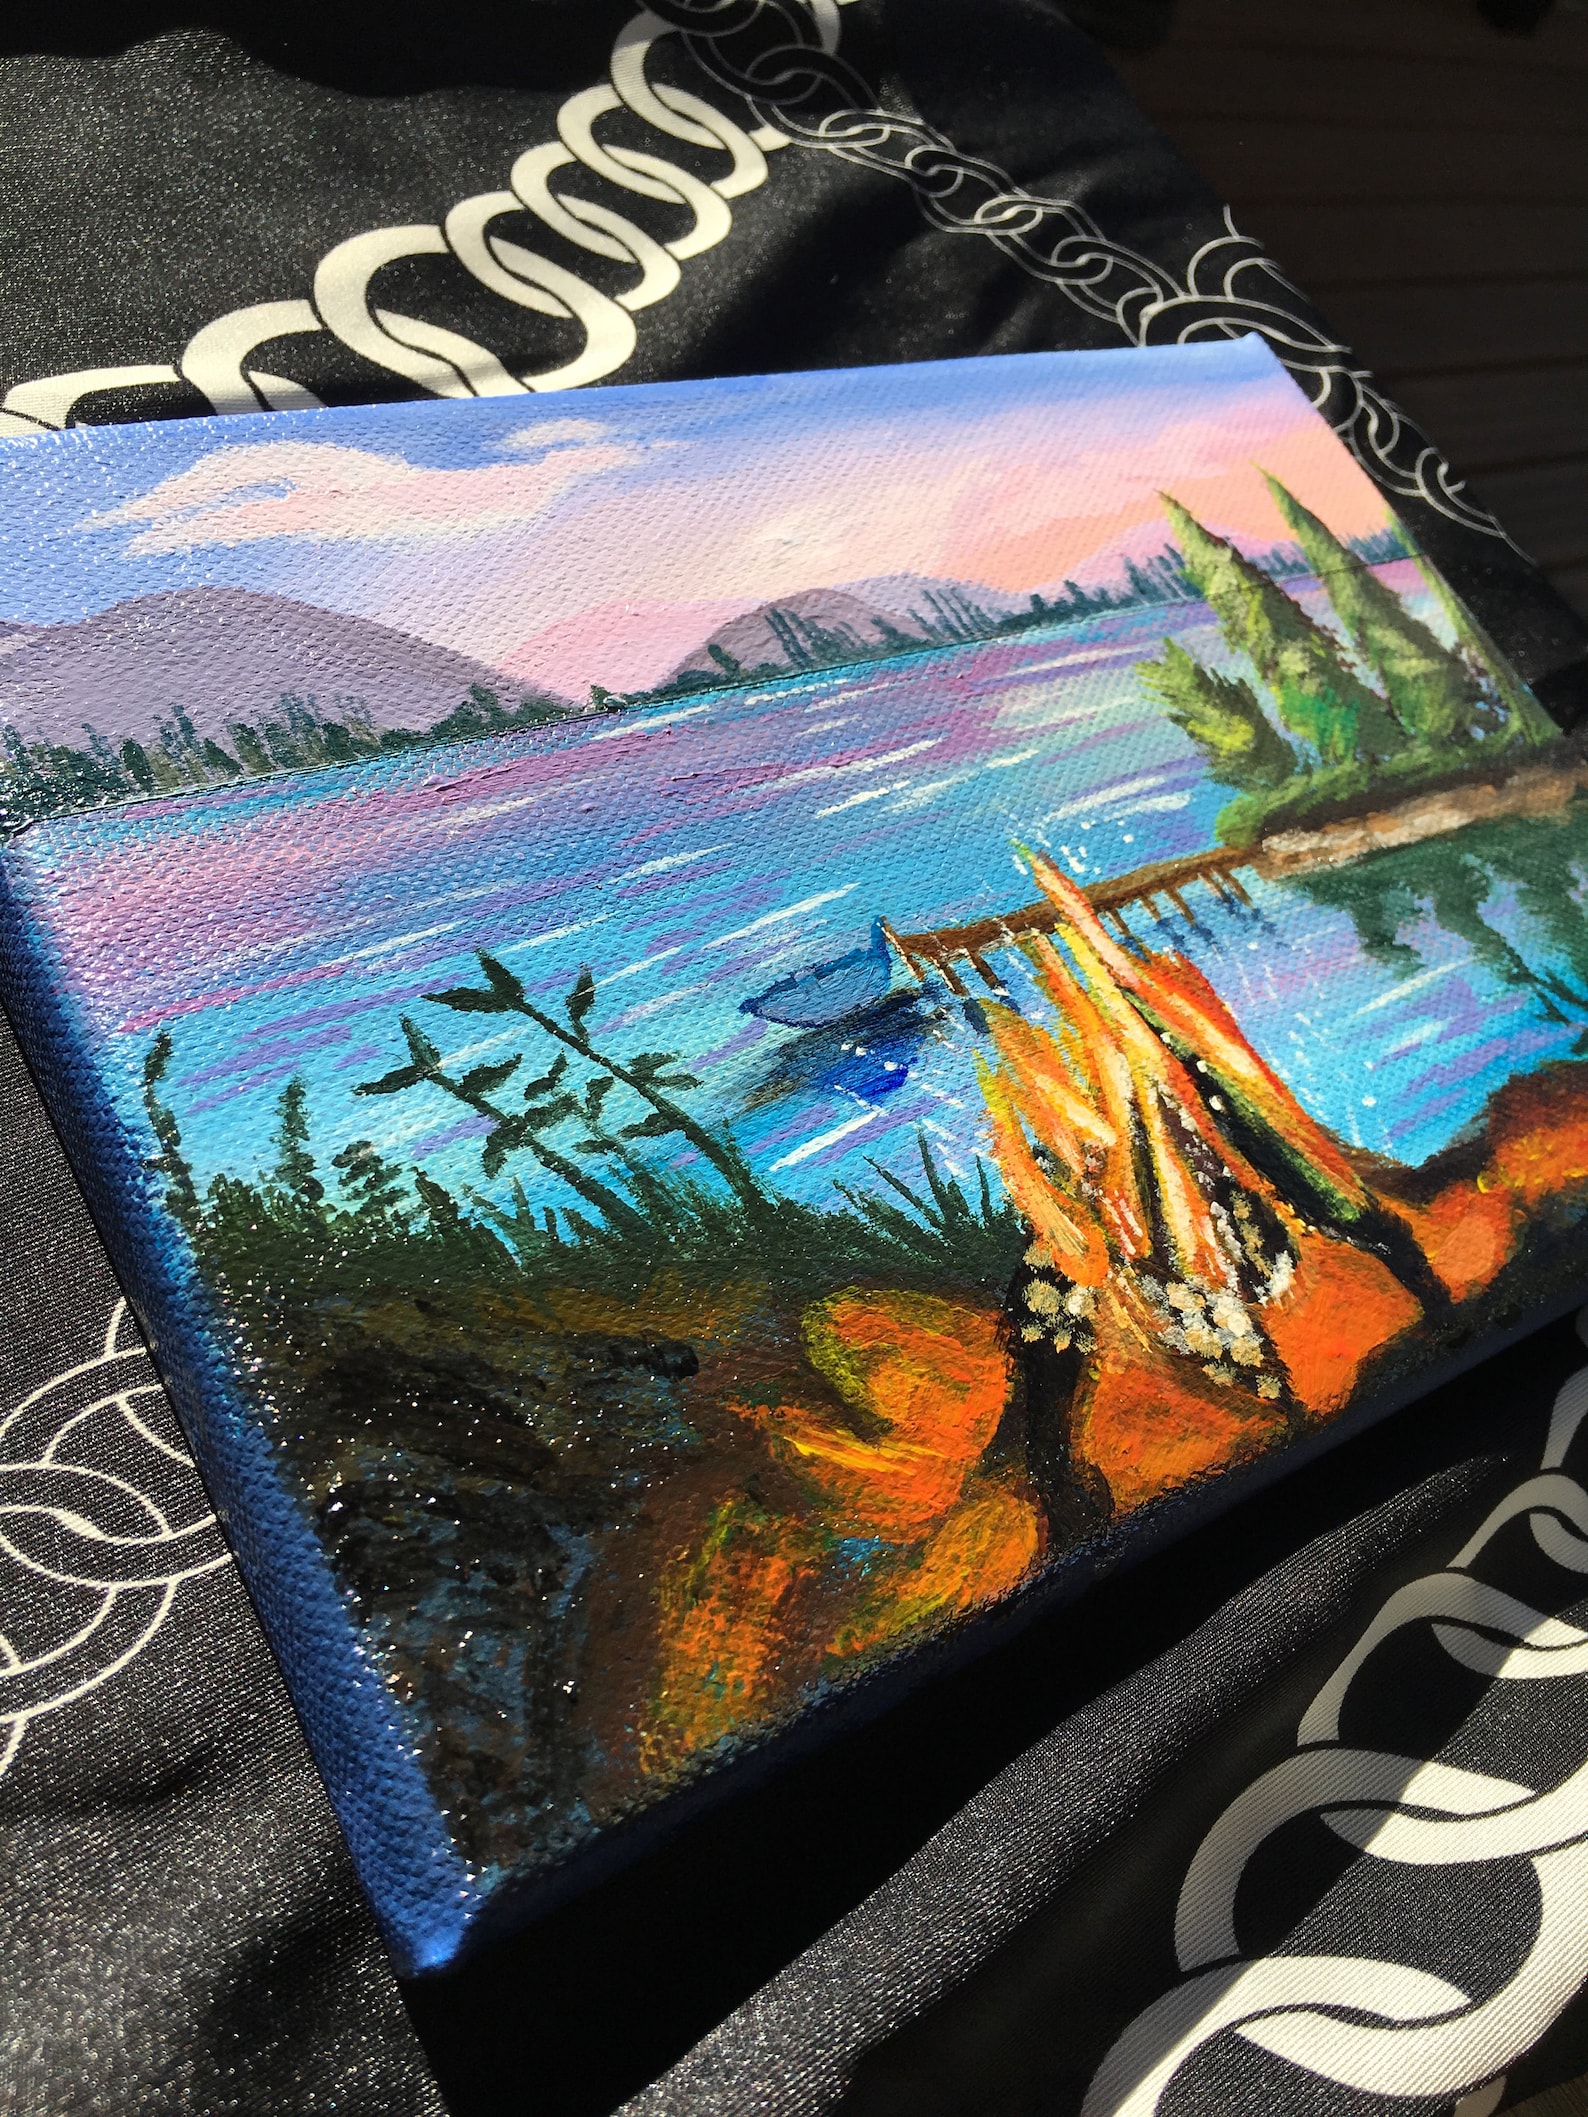 Acrylic Painting on Canvas Campfire by a calm lake at sunset | Etsy